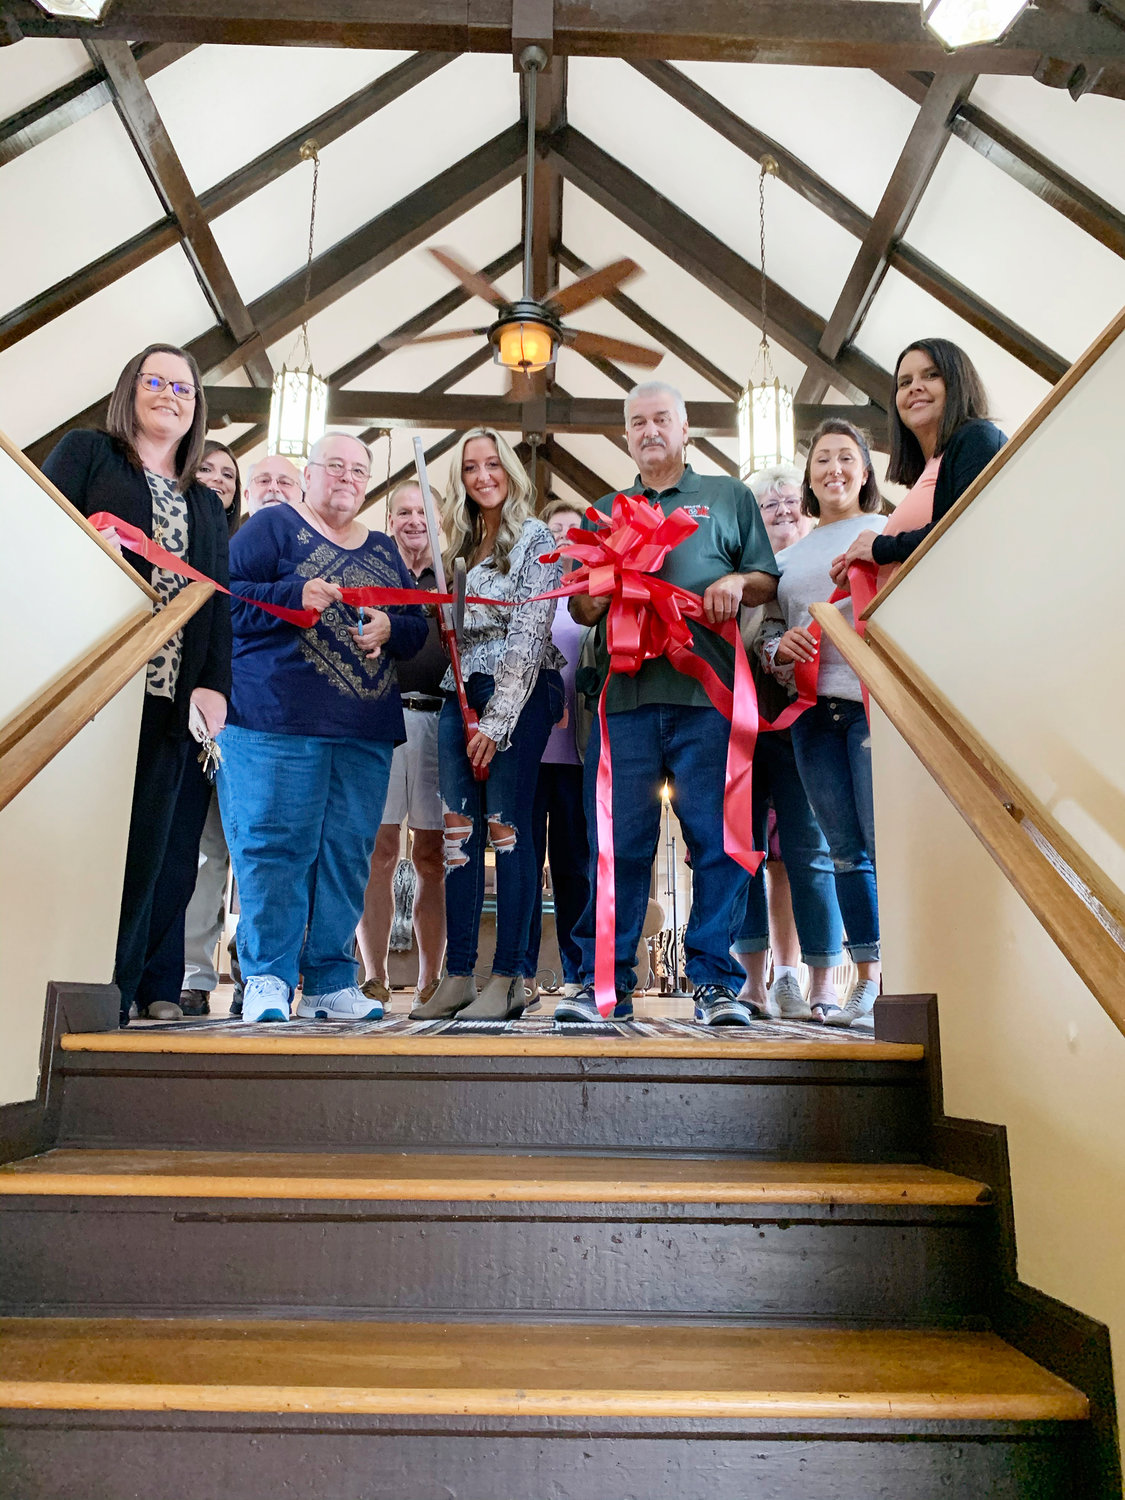 Sparta White-County Chamber of Commerce recently hosted a ribbon cutting ceremony for The Robin’s Nest, which is an Airbnb located at 20 N. Church St.